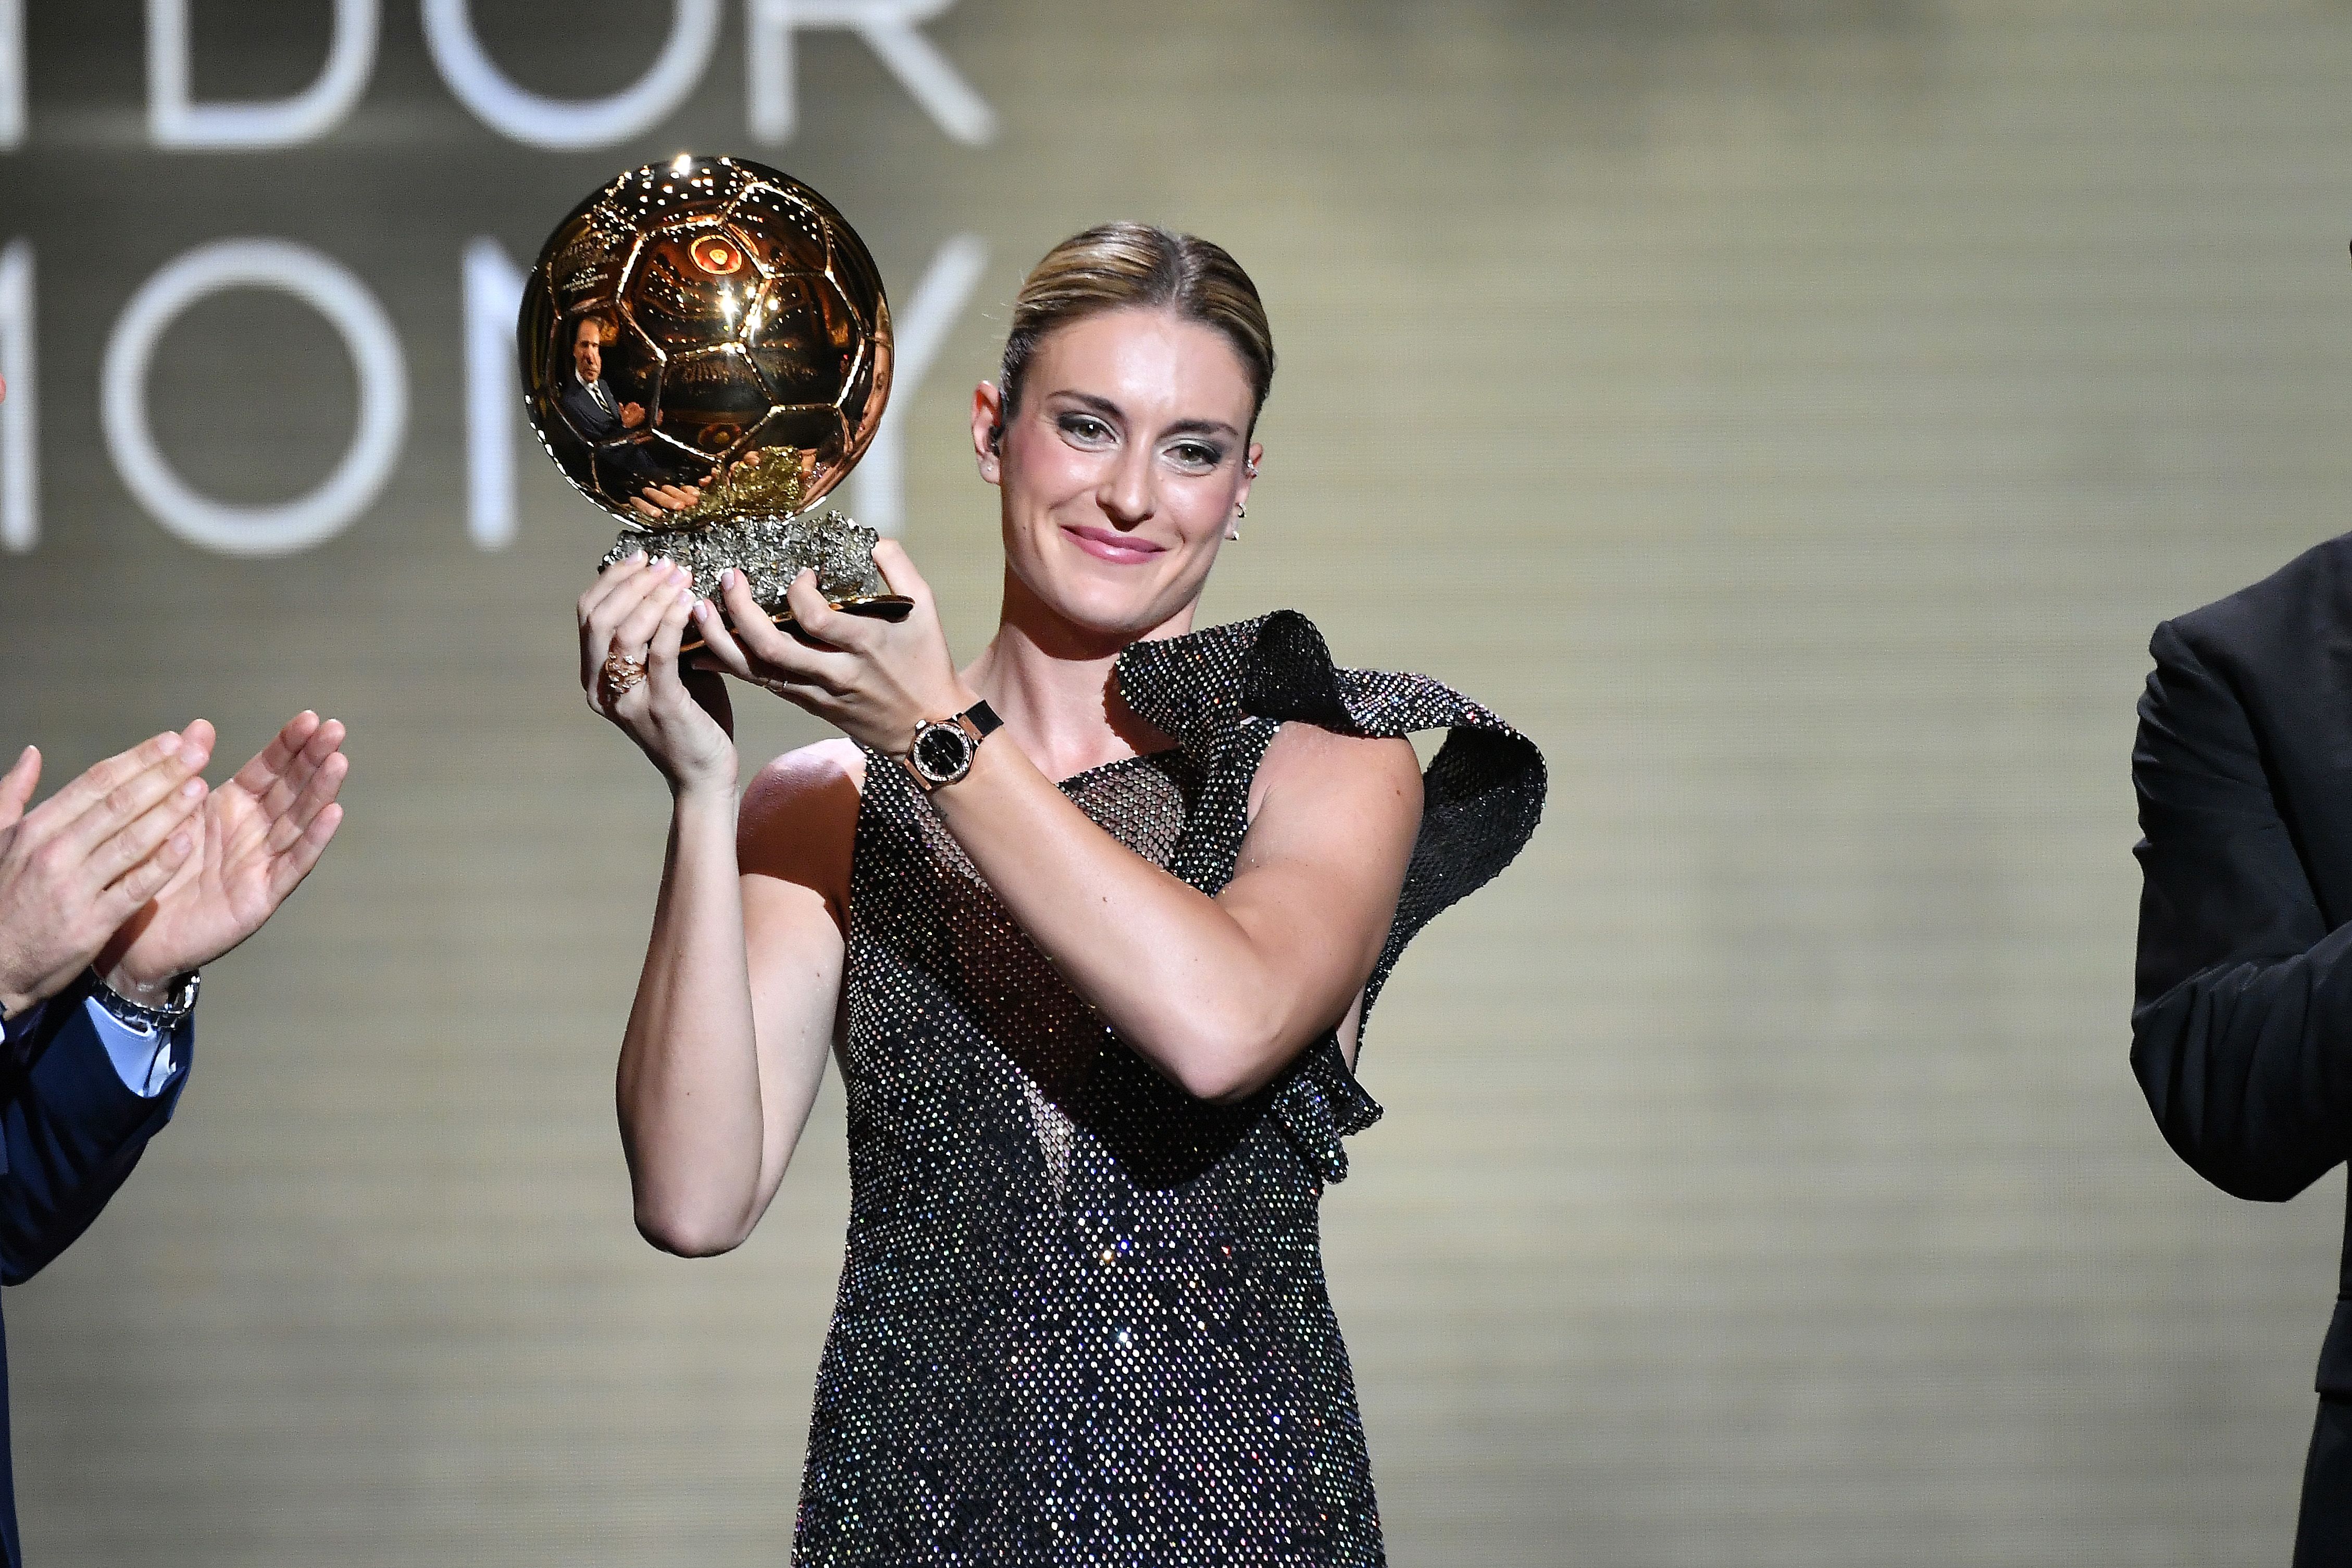 Ballon d'Or ceremony: Alexia Putellas makes history, Real Madrid men's  players take offense and boos for Mbappé?